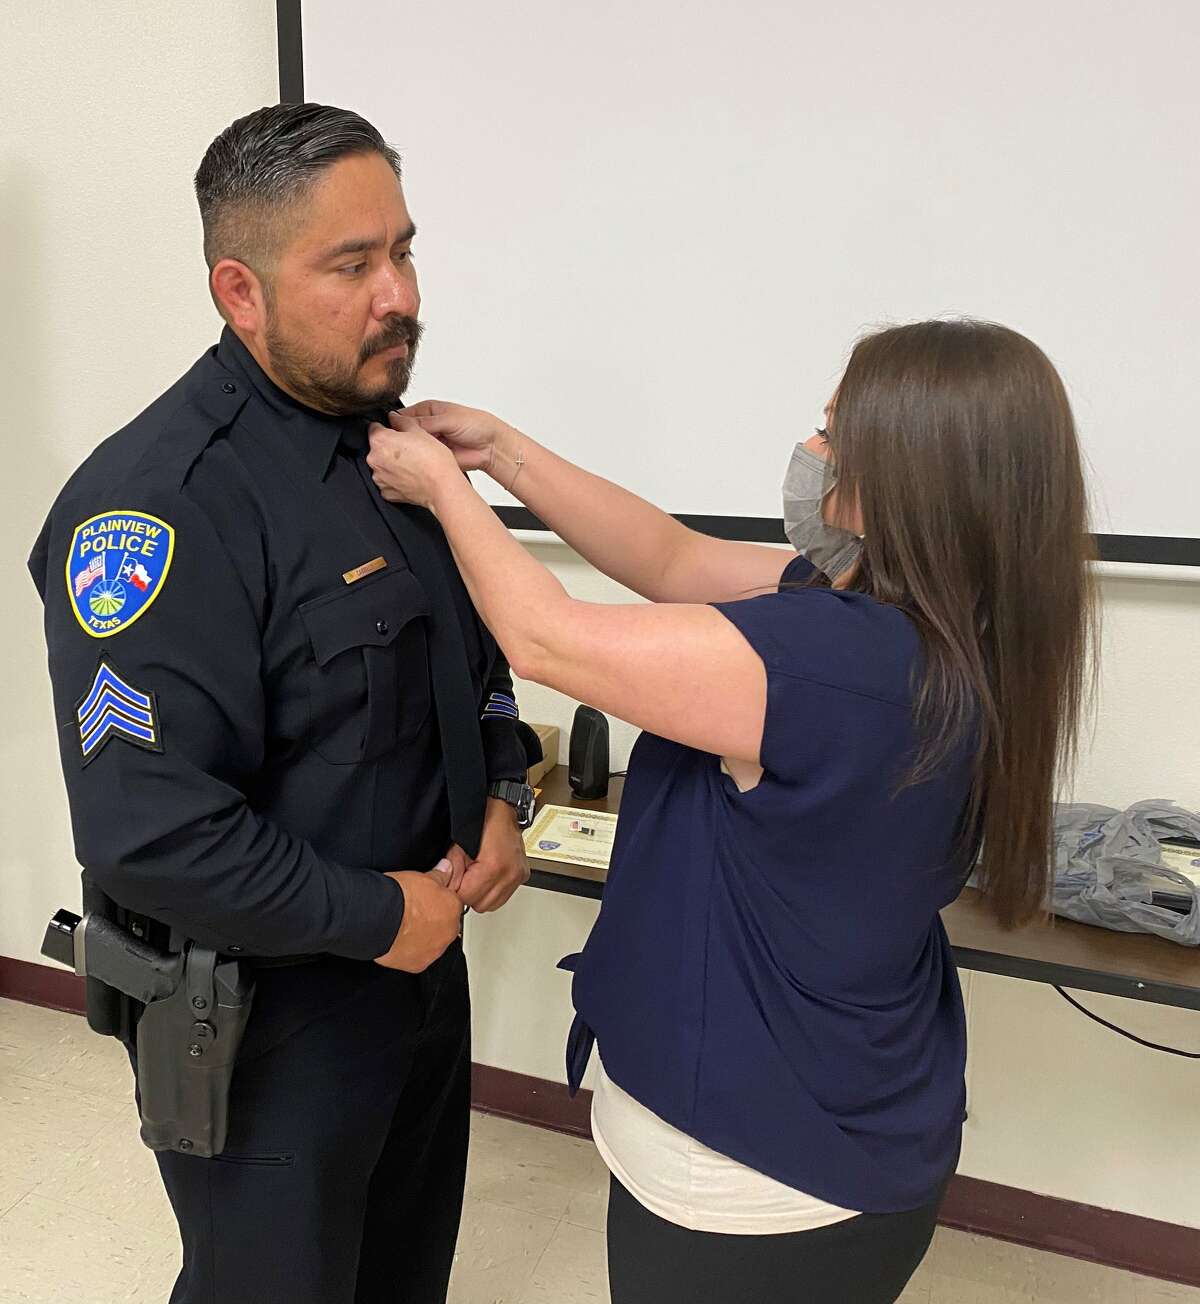 The Plainview Police Department recently promoted Gabriel Carrillo to patrol lieutenant. Carrillo has served the Plainview PD for nine years.